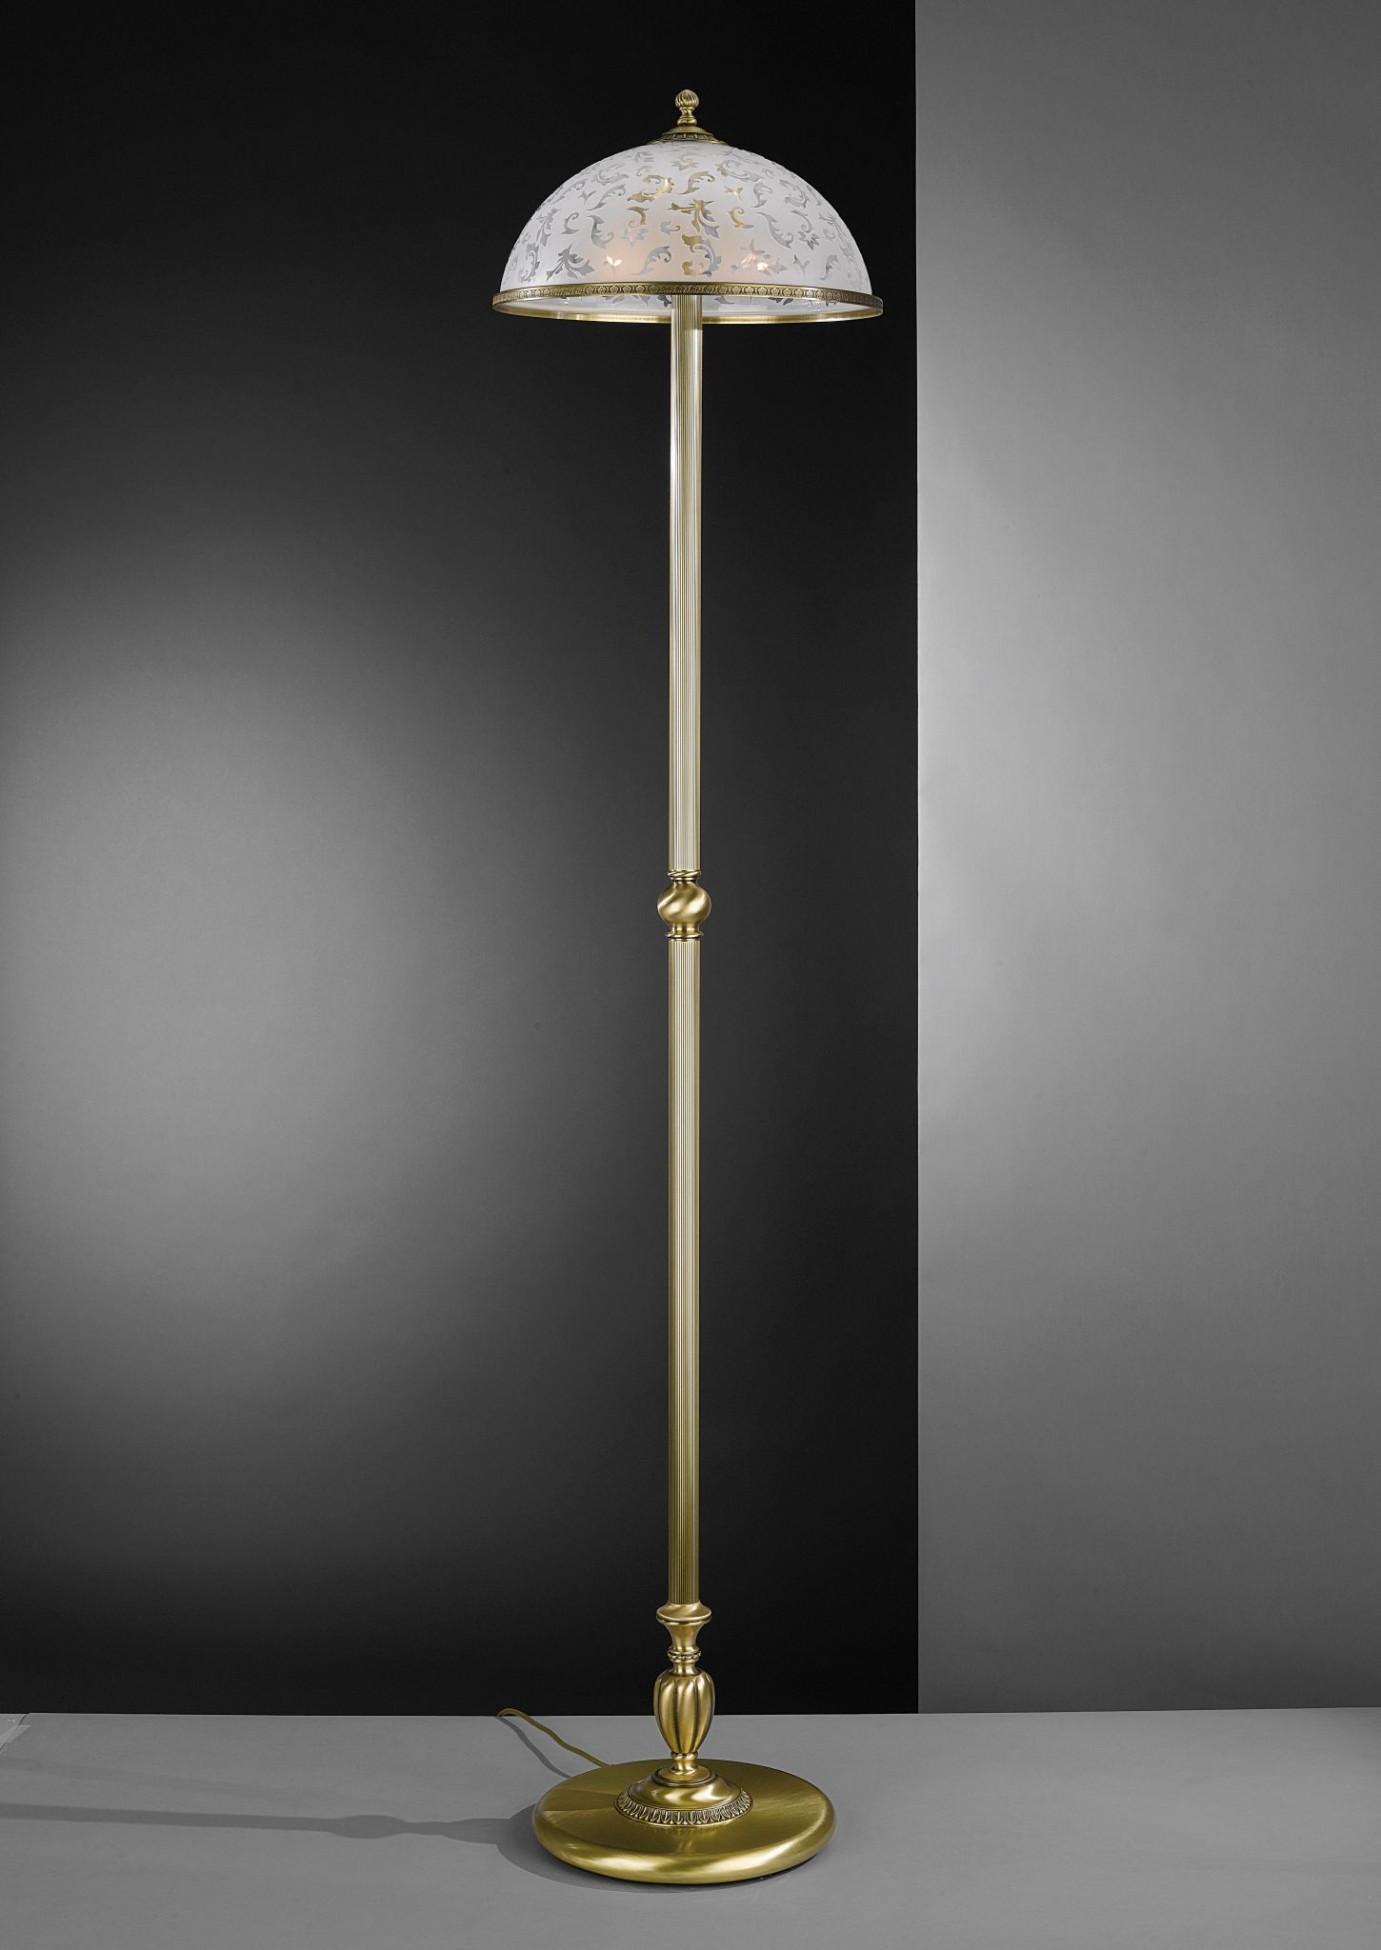 Brass Floor Lamp With Decorated Frosted, Frosted Glass Shade For Floor Lamp